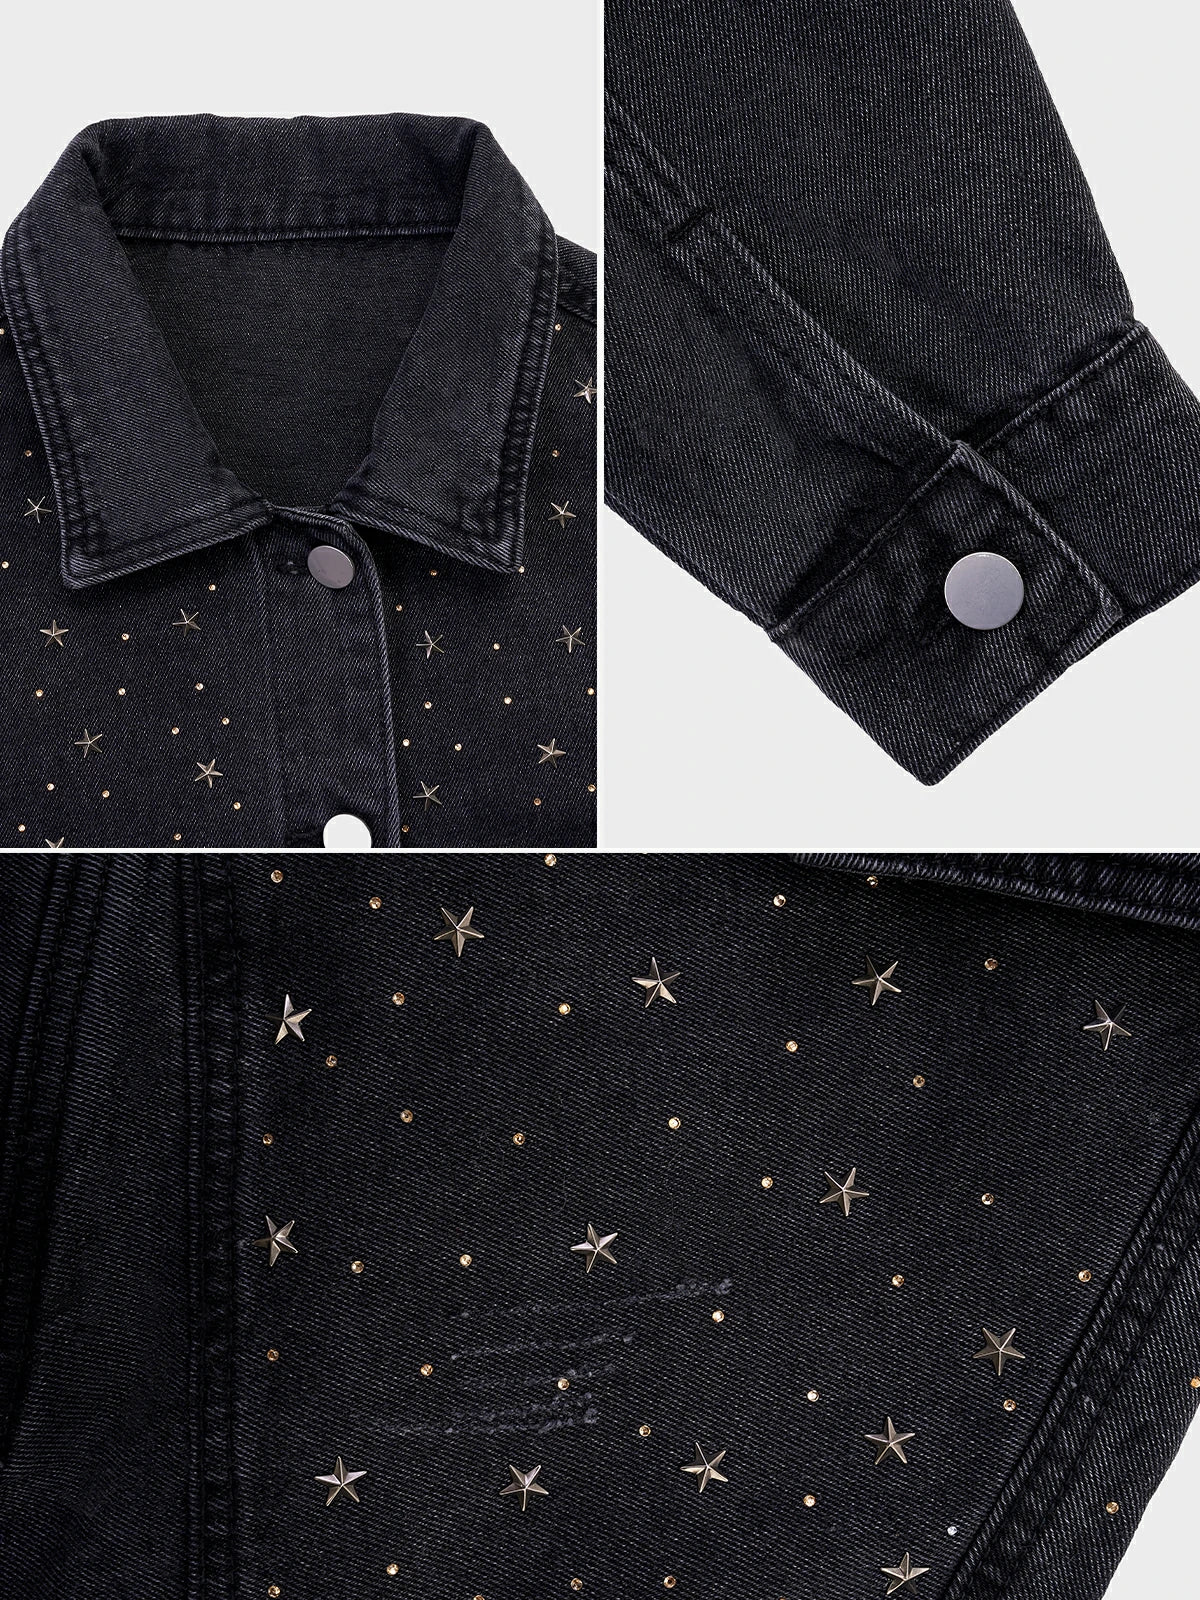 Make a bold fashion choice with this contemporary short denim jacket, designed with captivating star-shaped bead embellishments.